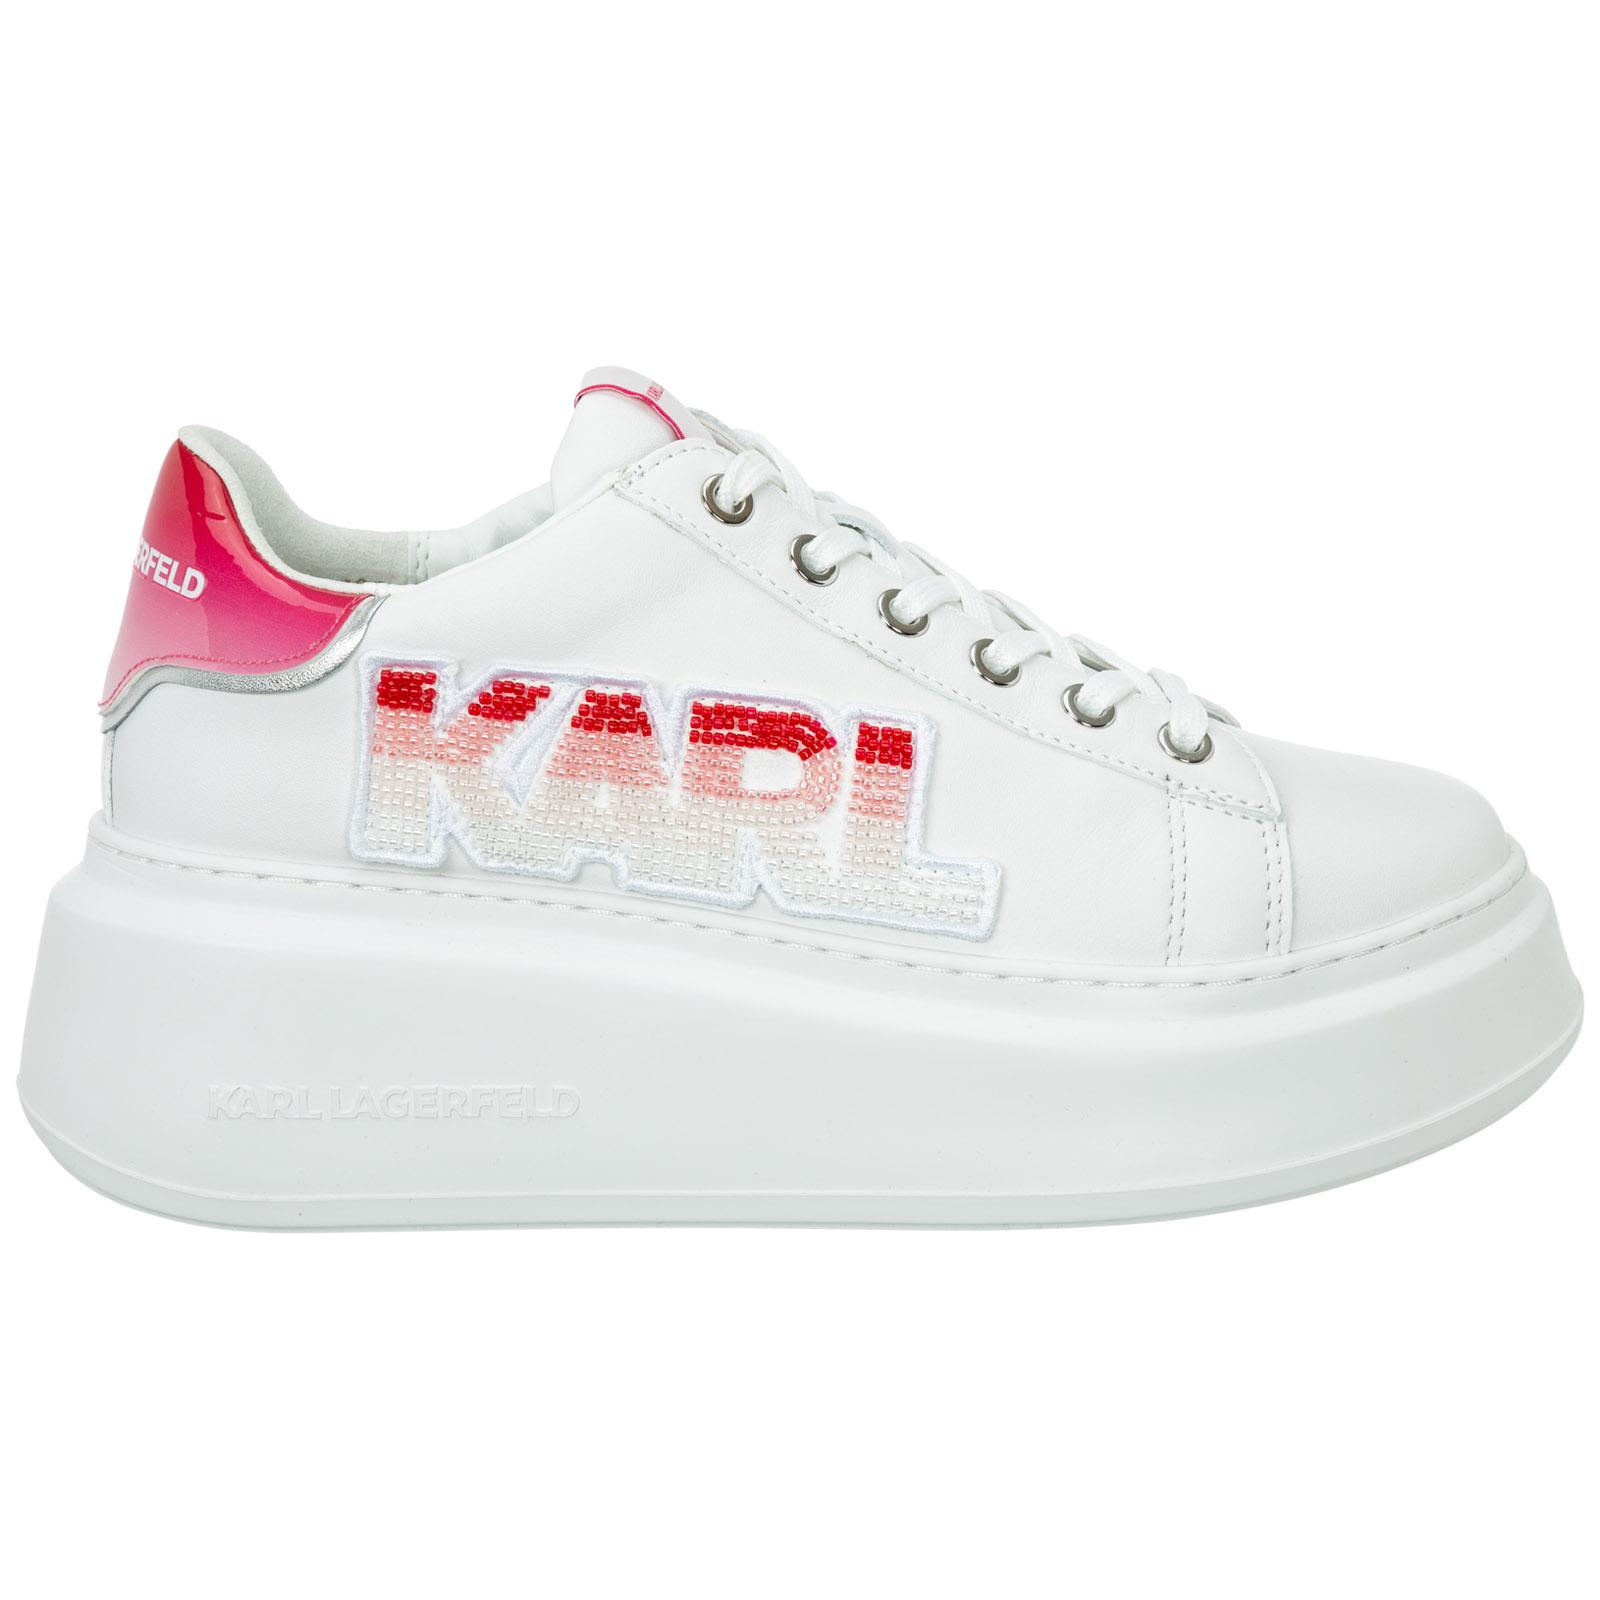 Karl Lagerfeld Shoes Leather Trainers Sneakers Anakapri in White - Pink  (White) | Lyst